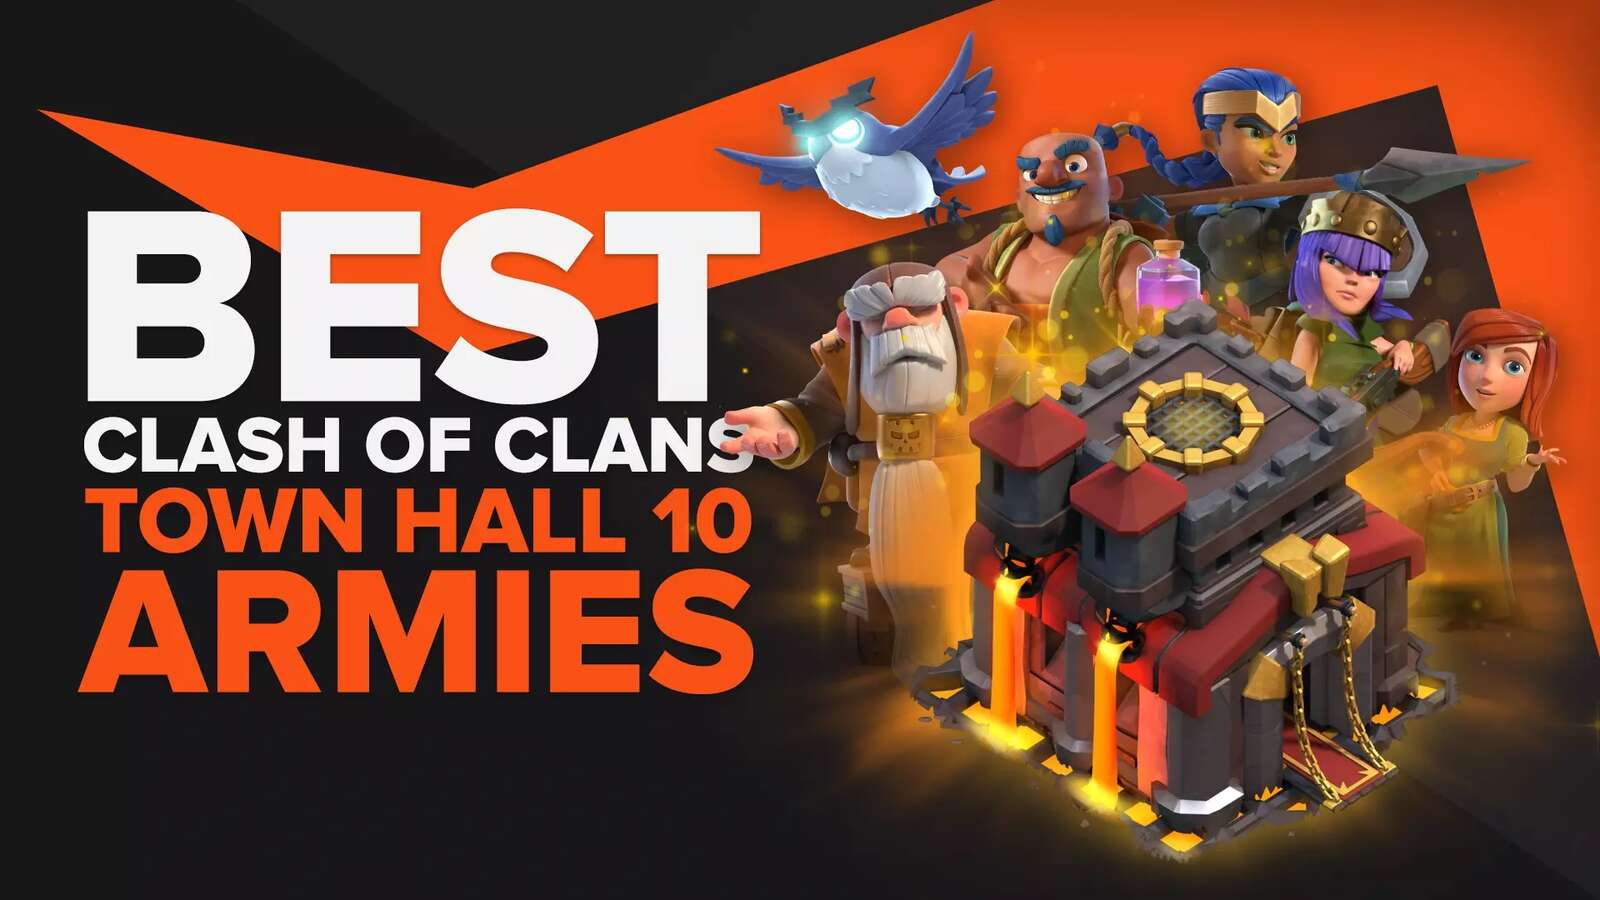 What Is The Best Army In Clash of Clans For Town Hall 10?